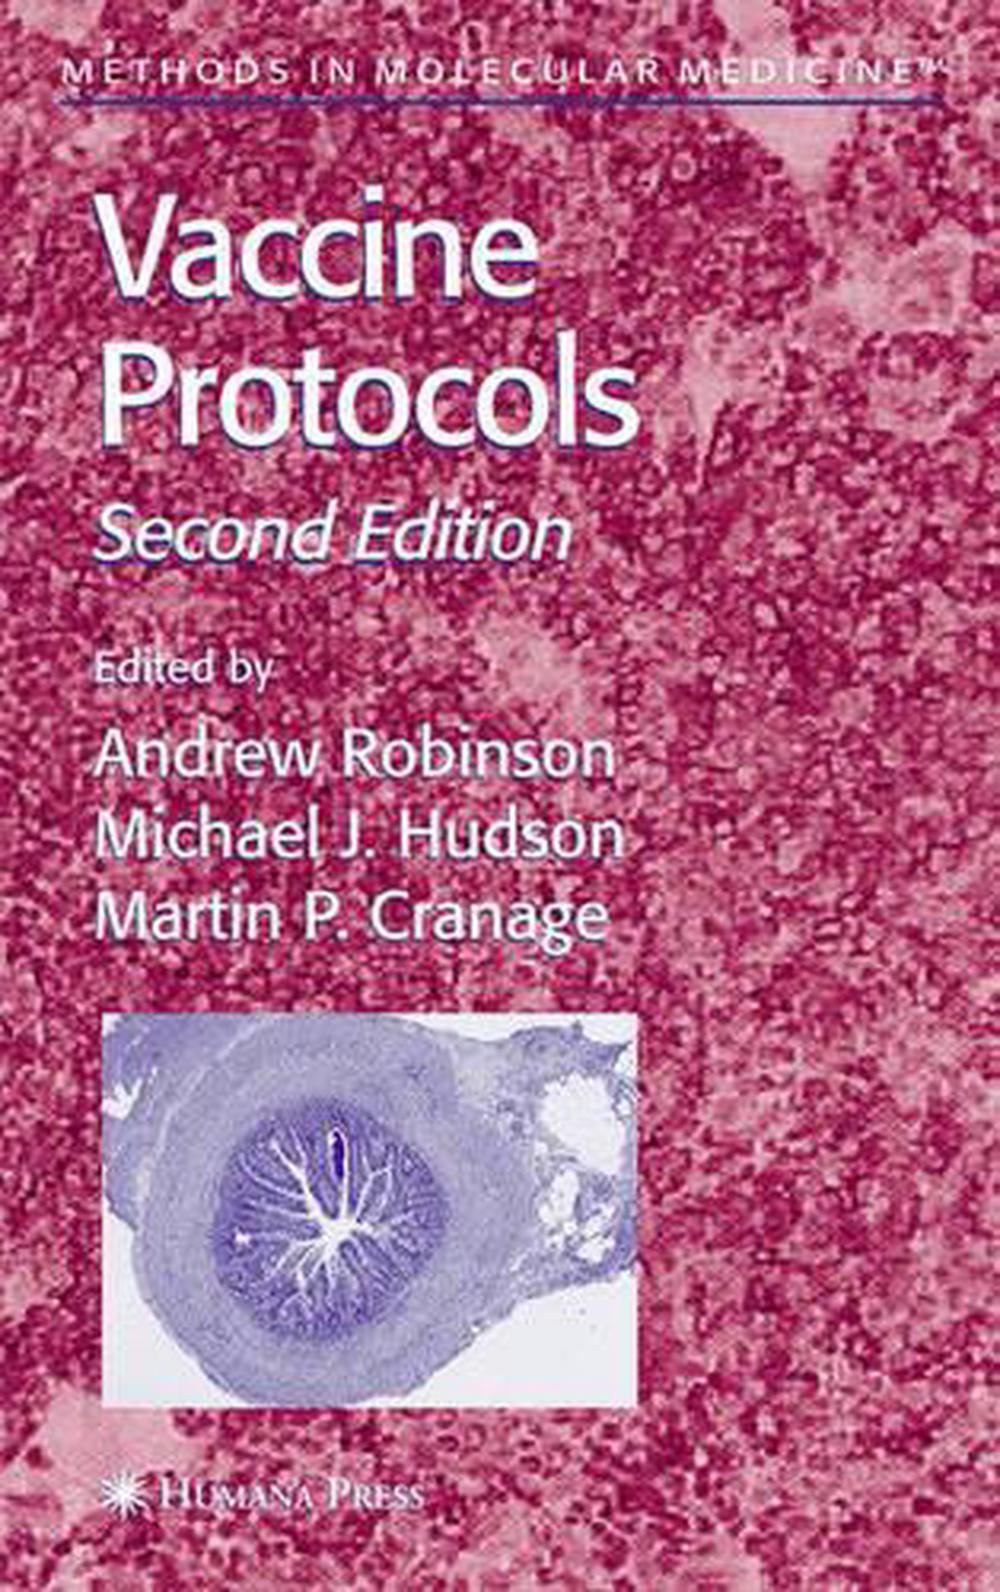 Vaccine Protocols: Second Edition by Andrew Robinson (English) Hardcover Book Fr | eBay